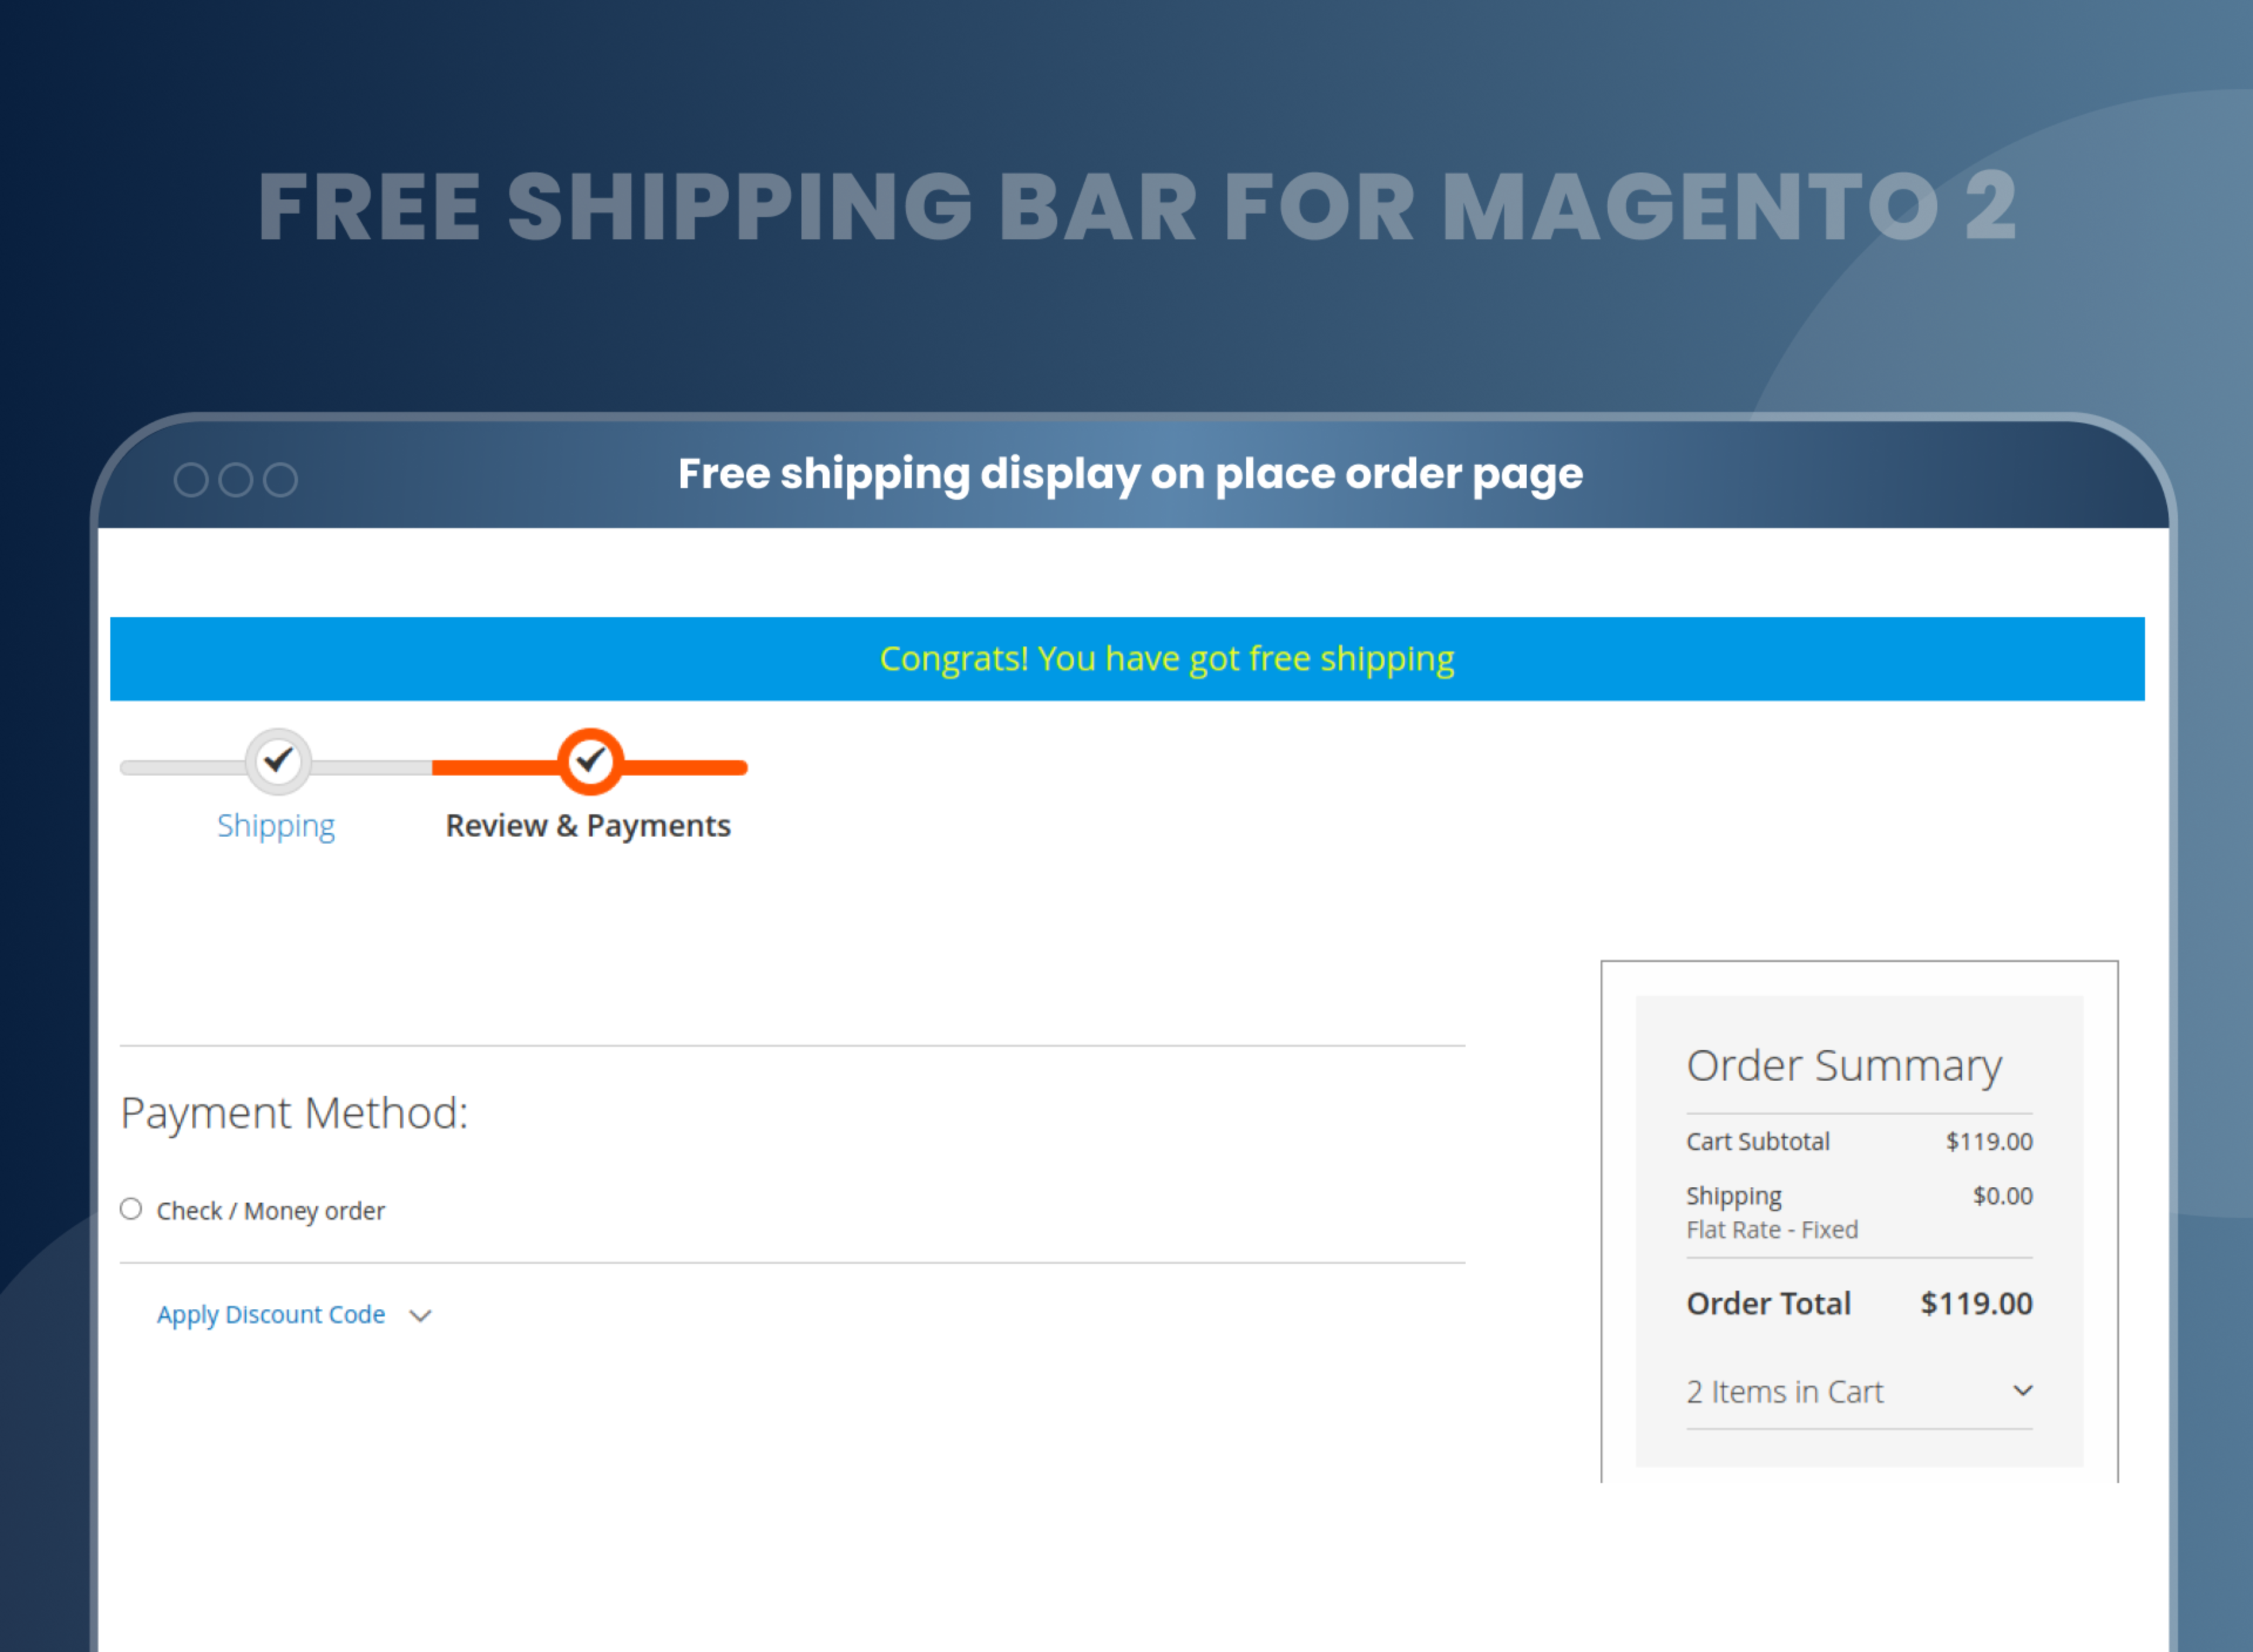 Free shipping display on place order page